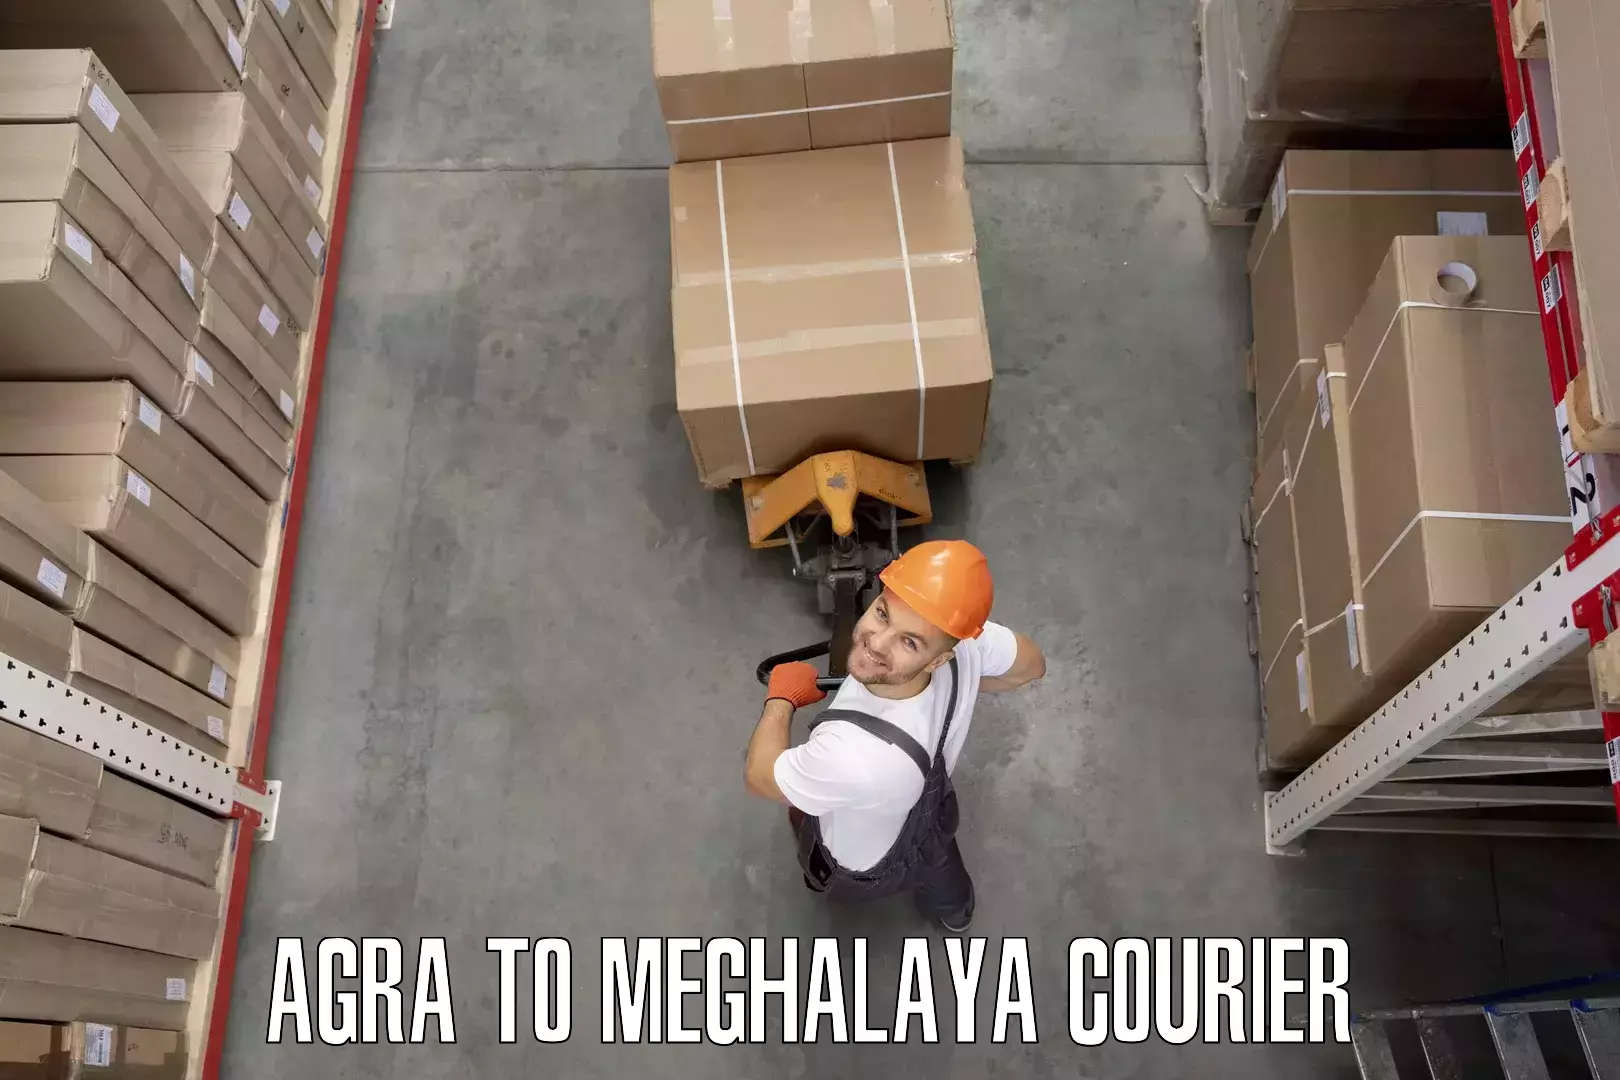 Furniture delivery service Agra to Umsaw